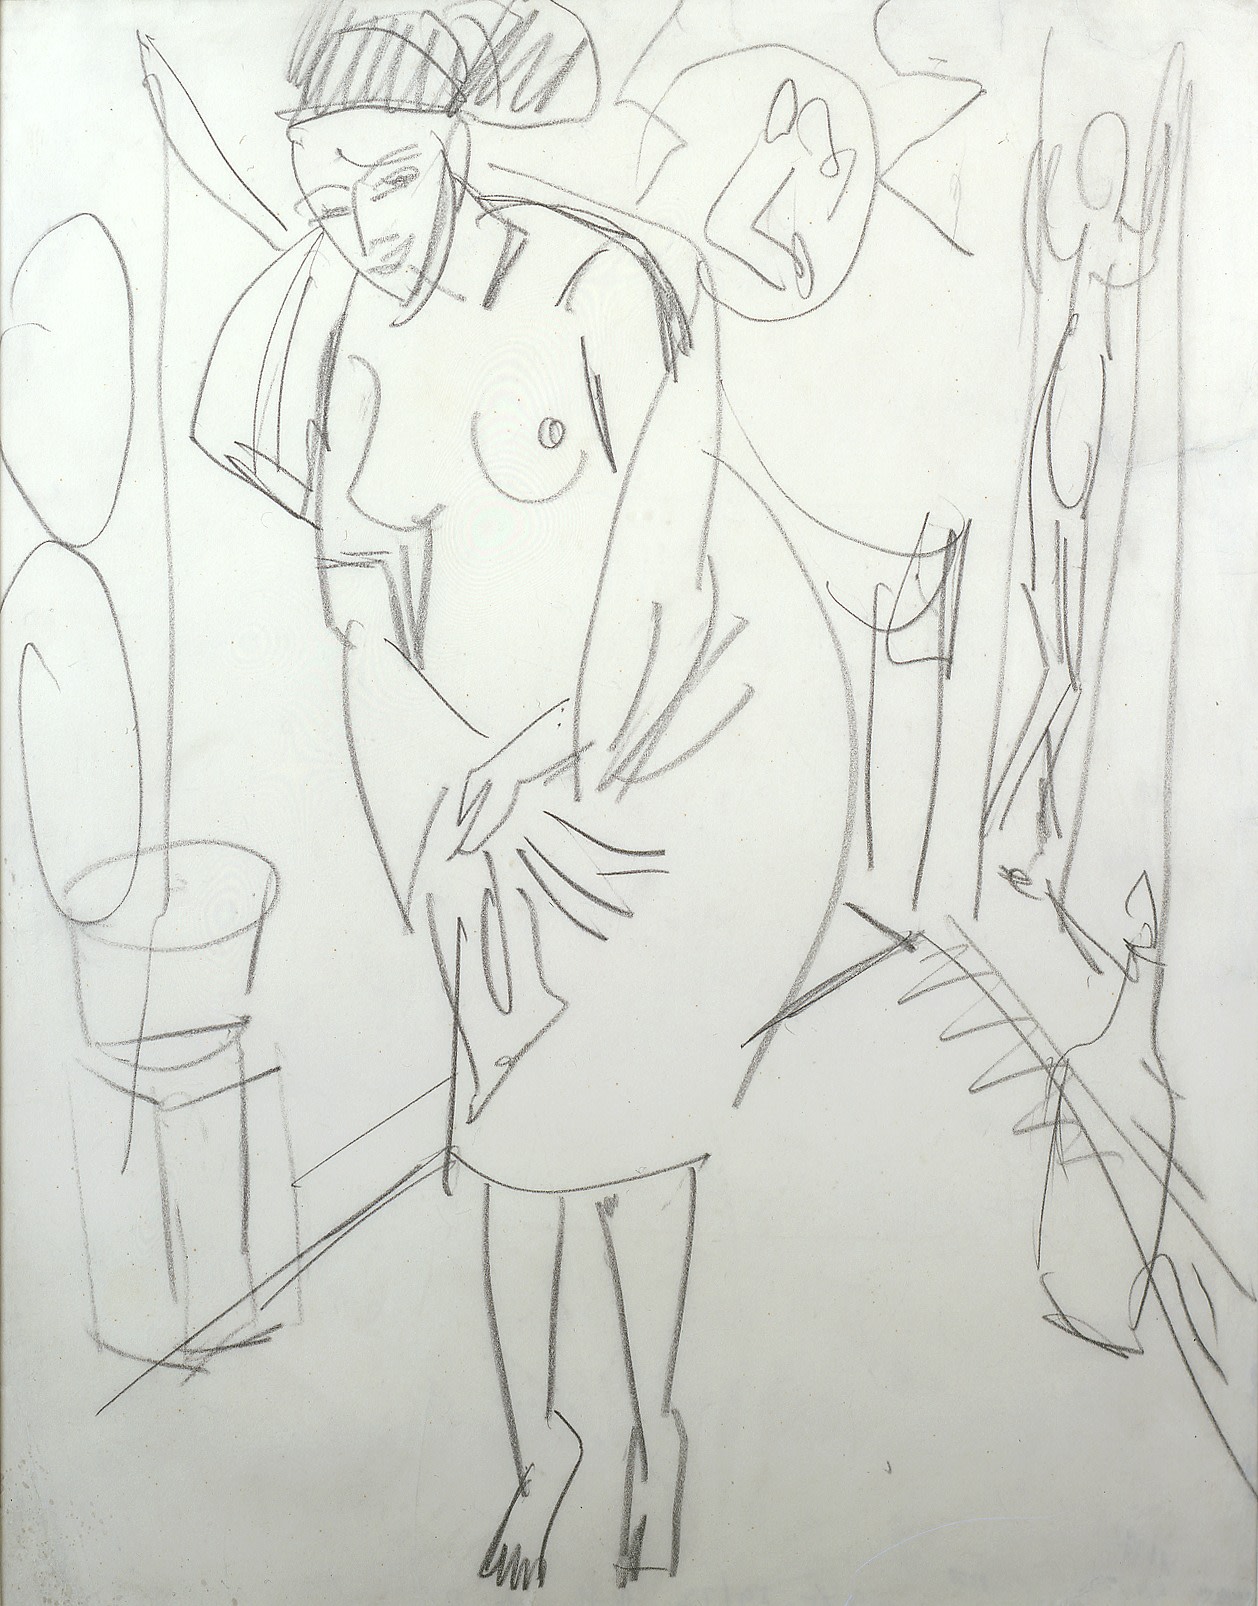 Ernst Ludwig Kirchner, Weiblichen Akt, teilweise In Badetuch (Female Nude Partially Clothed in a Bath Towel), 1912, pencil on paper, 22 x 16 1/2 inches